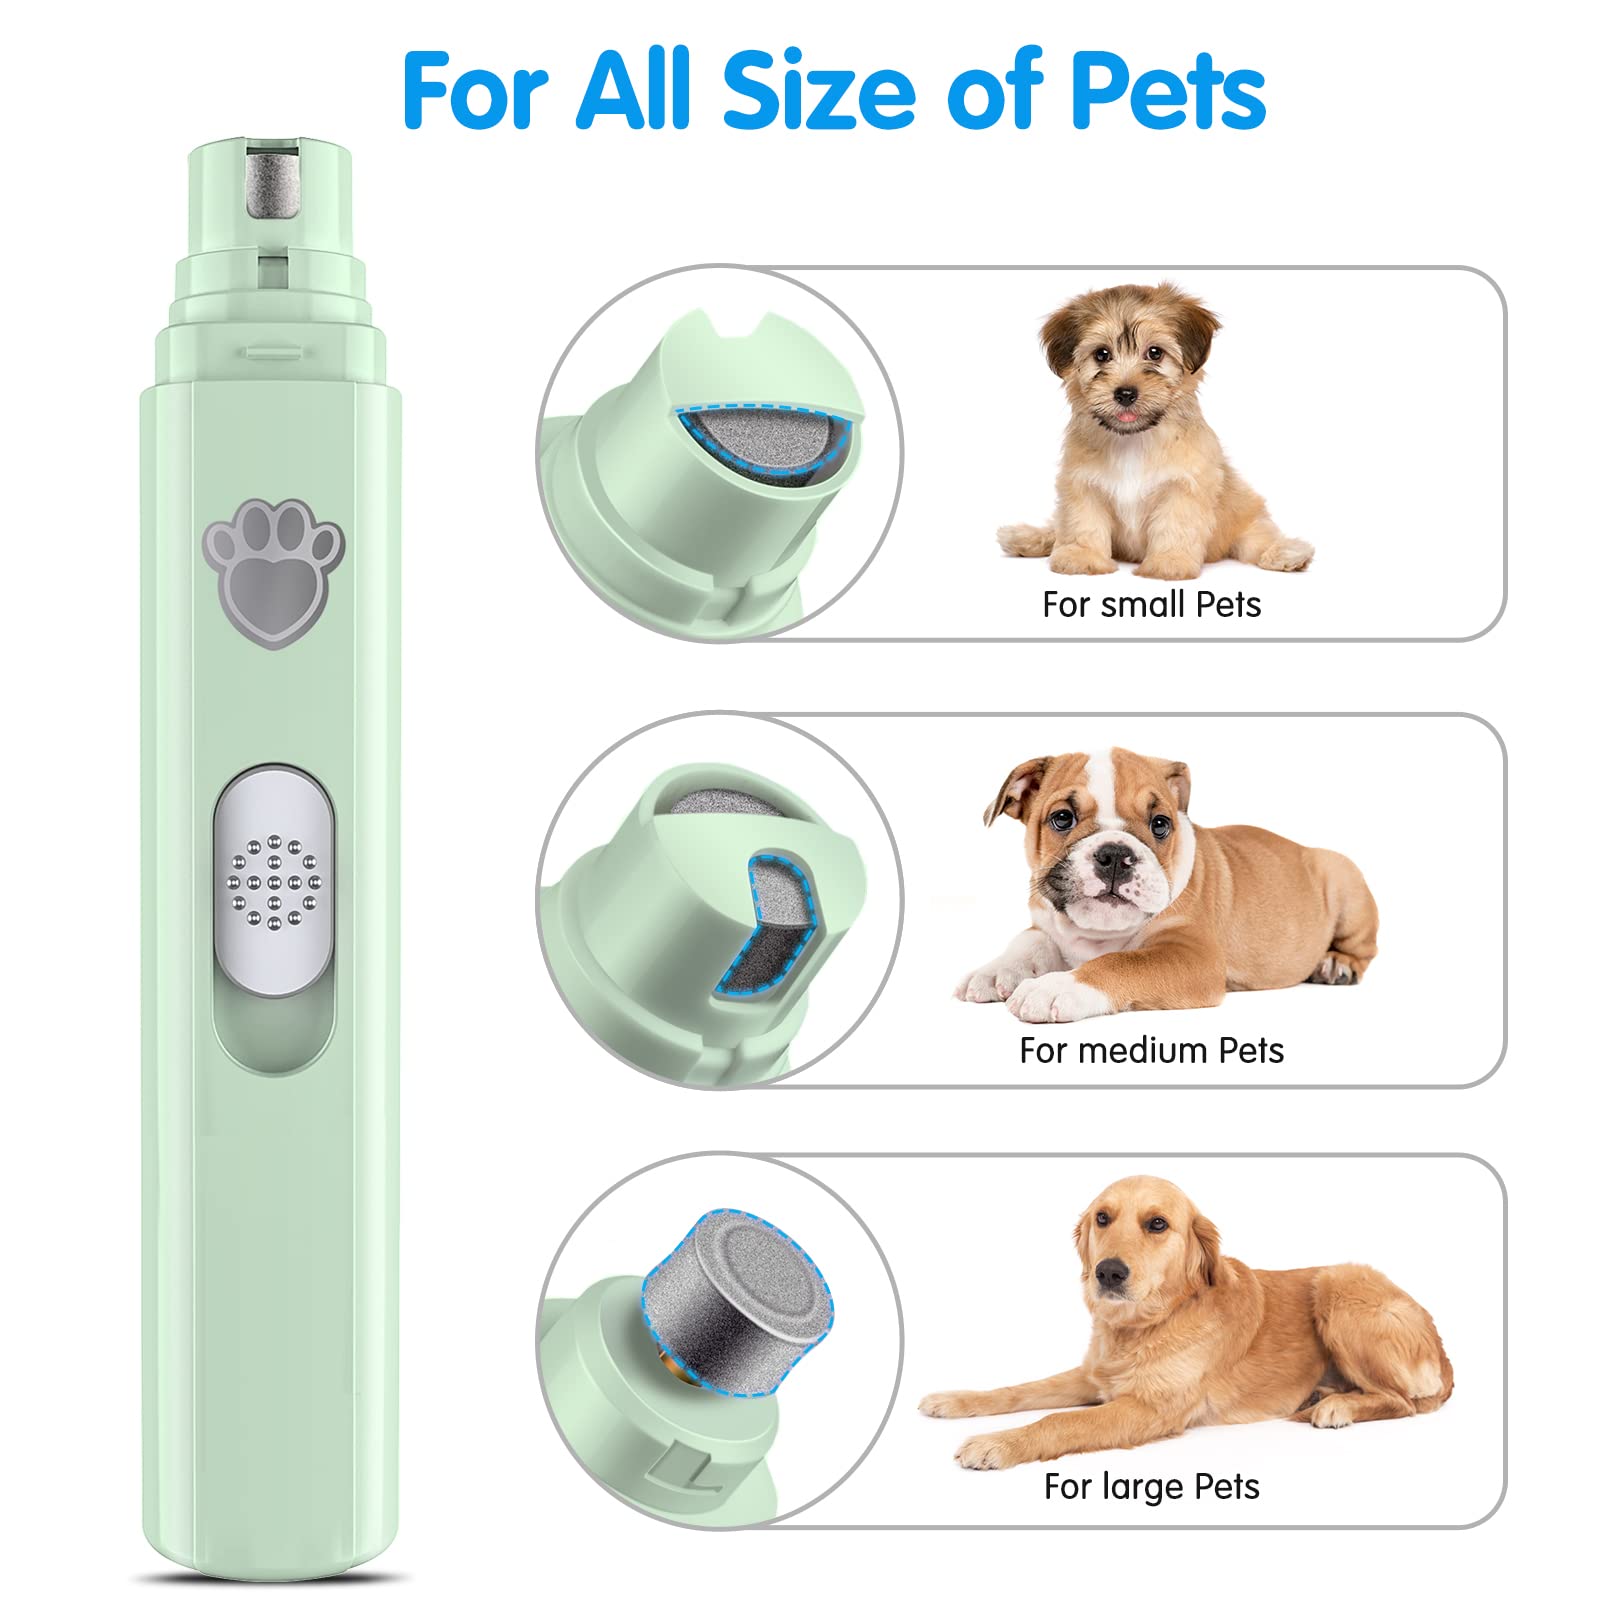 VIWIK Dog Nail Grinder, 2-Speed Rechargeable Dog Nail Trimmers for Large Medium & Small Dogs, Upgrade Professional Electric Pet Paws Grooming, Quiet Puppy Grooming Tool, for Dogs Cats